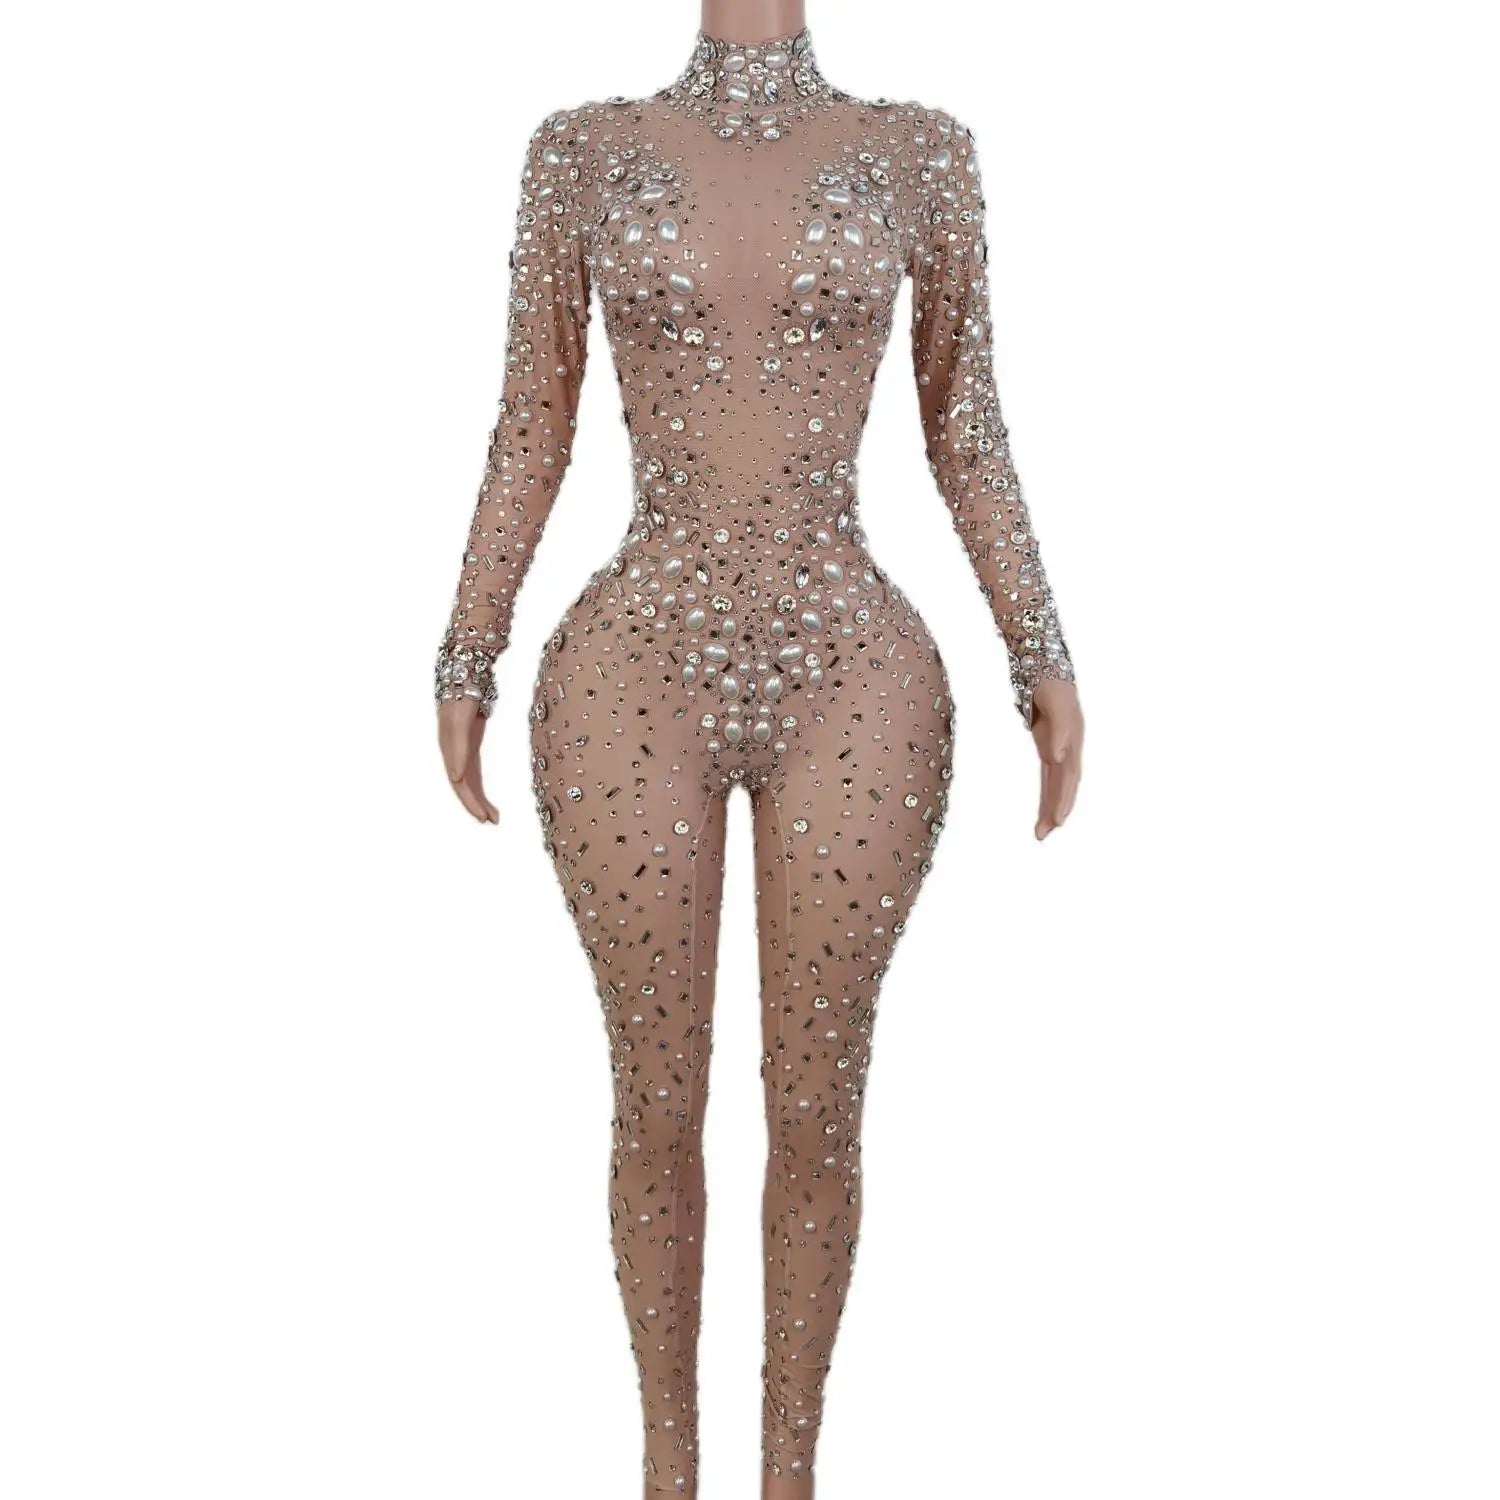 Women Stage Big Pearls Rhinestones Stretchy Transparent Jumpsuit Evening Birthday Celebrate Outfit Sexy Dancer Bodysuit